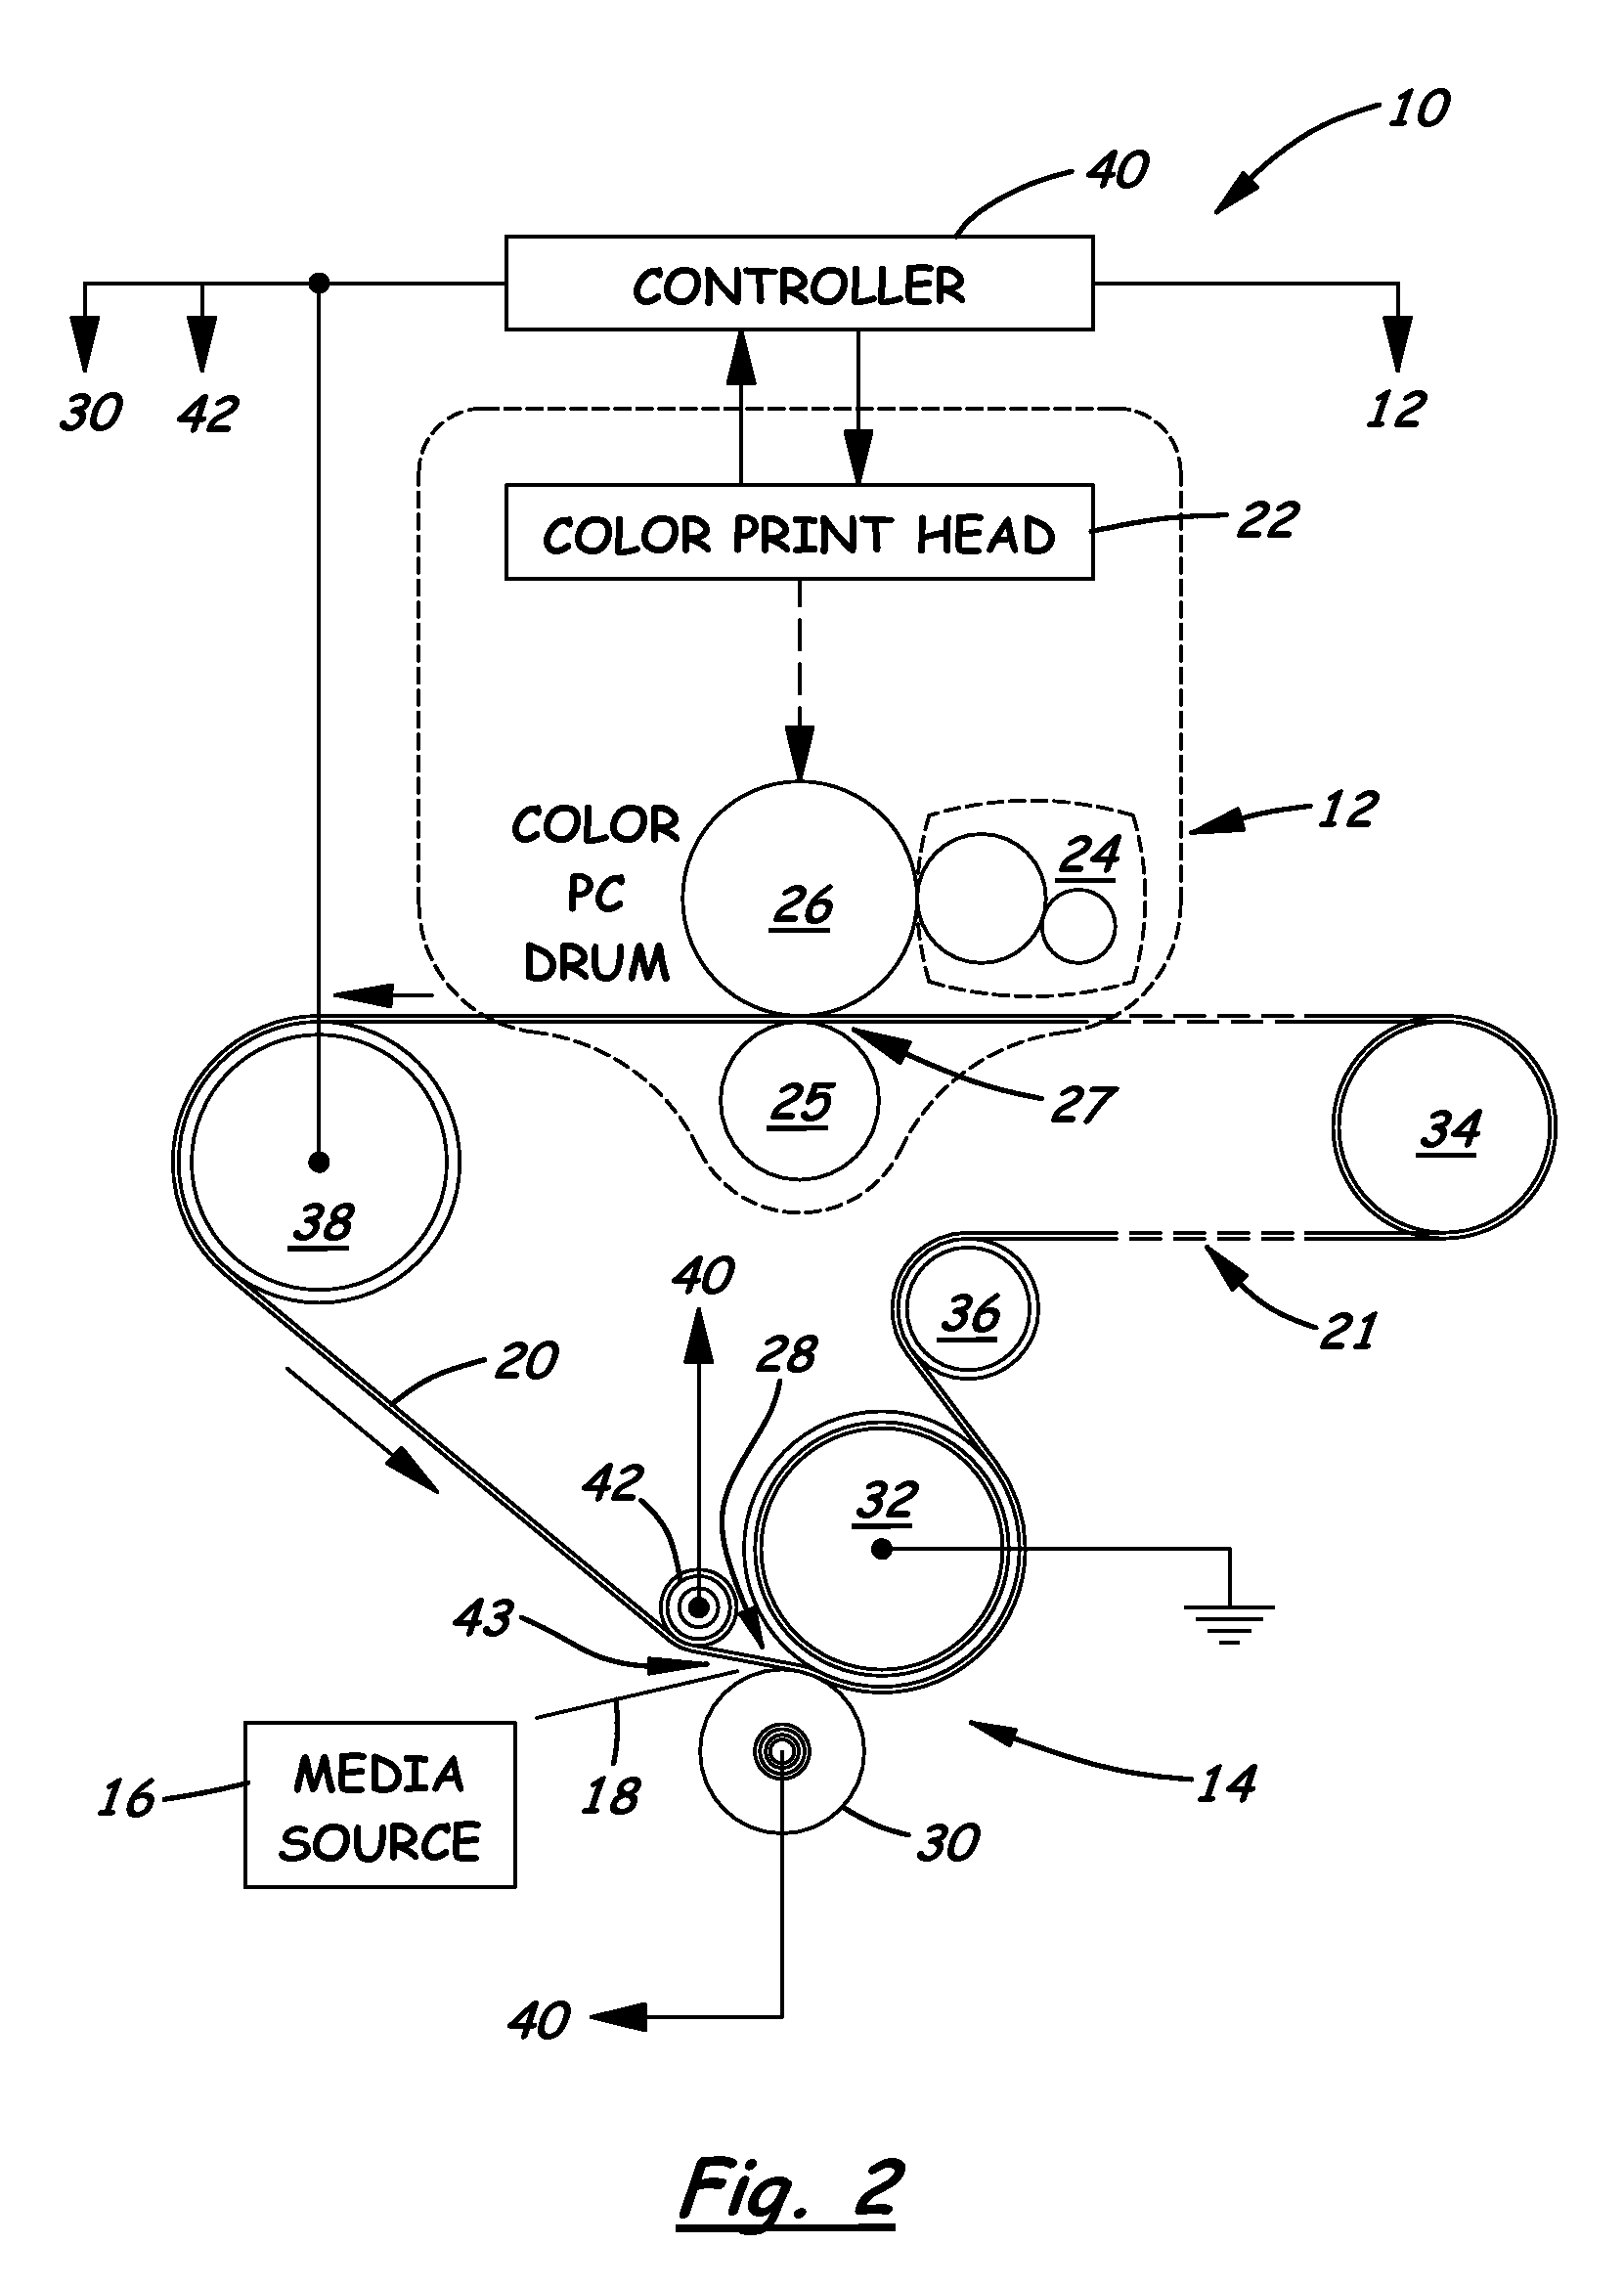 System for tailoring a transfer nip electric field for enhanced toner transfer in diverse environments